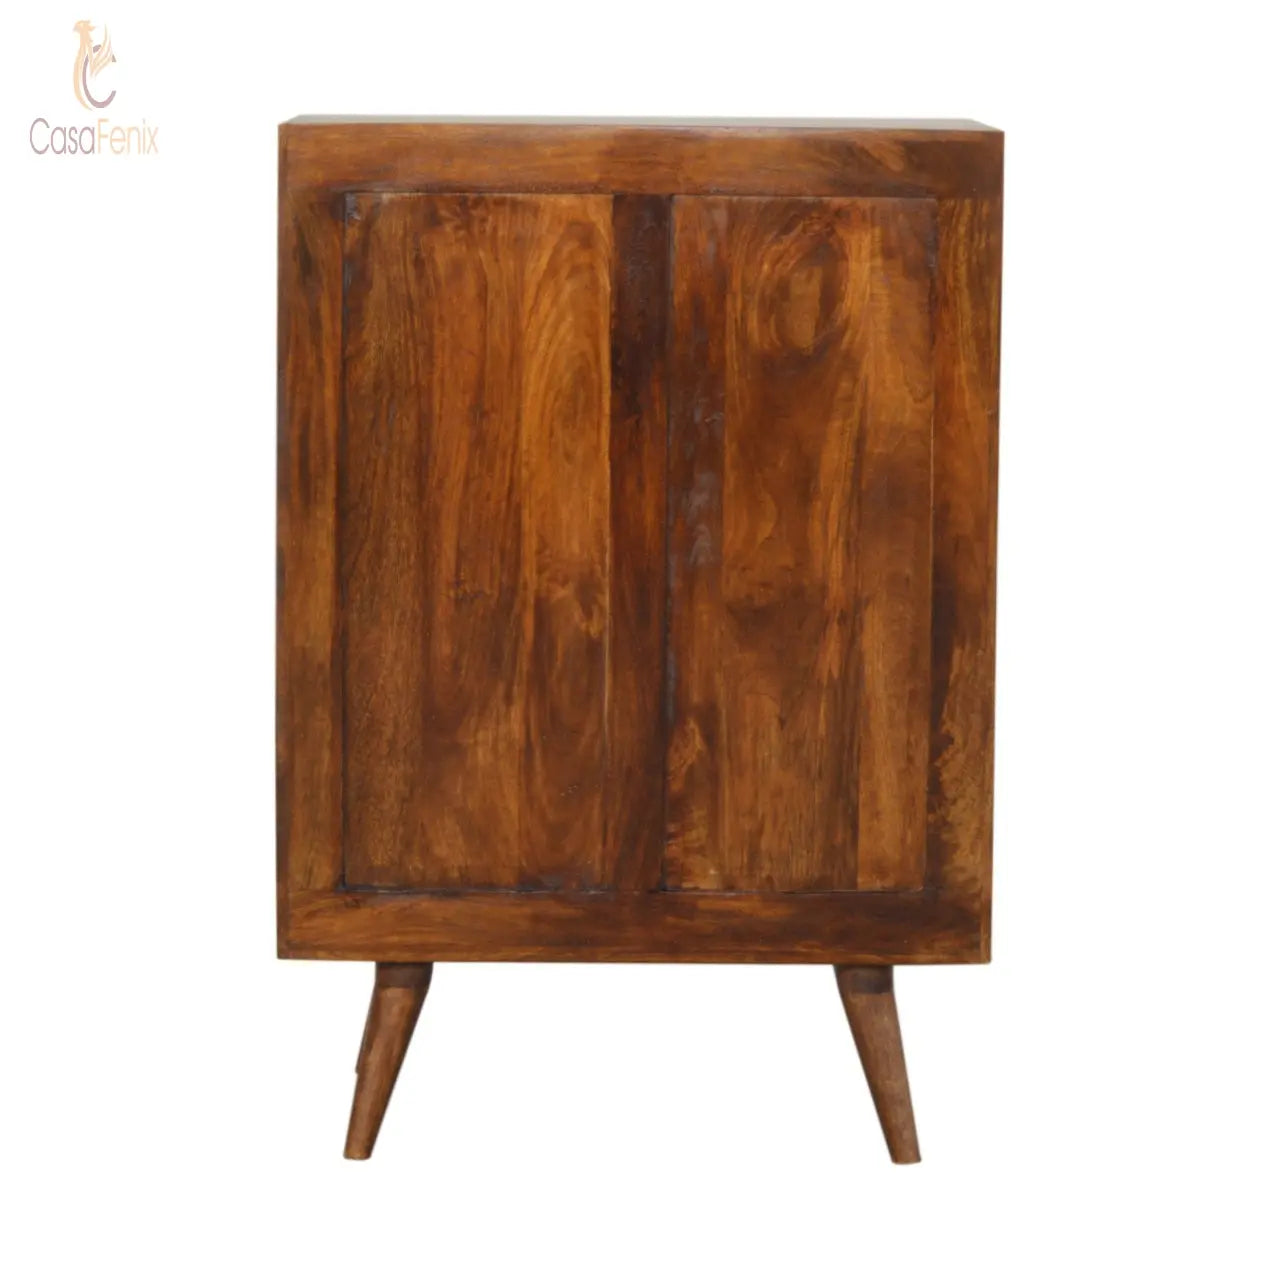 Chestnut Gold Inlay Abstract Cabinet 100% solid mango wood in a fine chestnut finish - CasaFenix